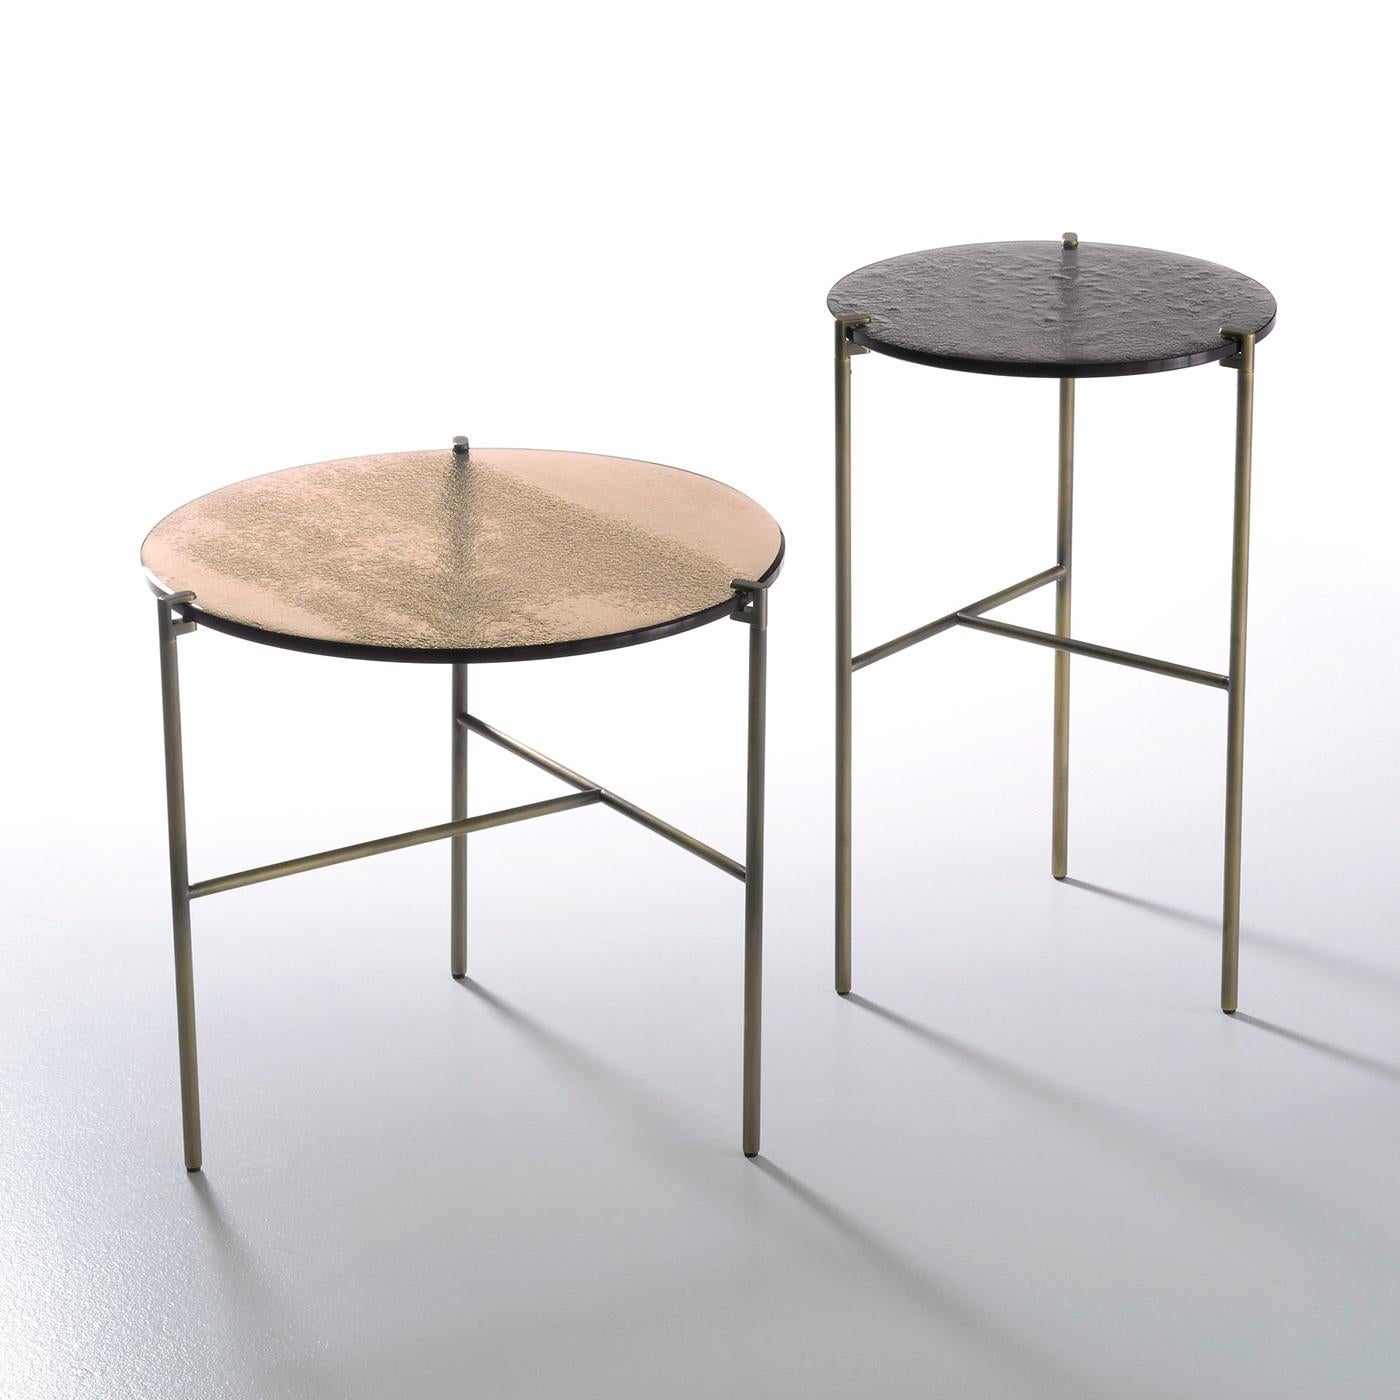 The simple and clean lines of the elegant Antitesi table make this accessory an ideal addition to your living room, lounge area or office space. With a base in satin brass and the top in three layer fused glass, in a beige tone and with a diameter